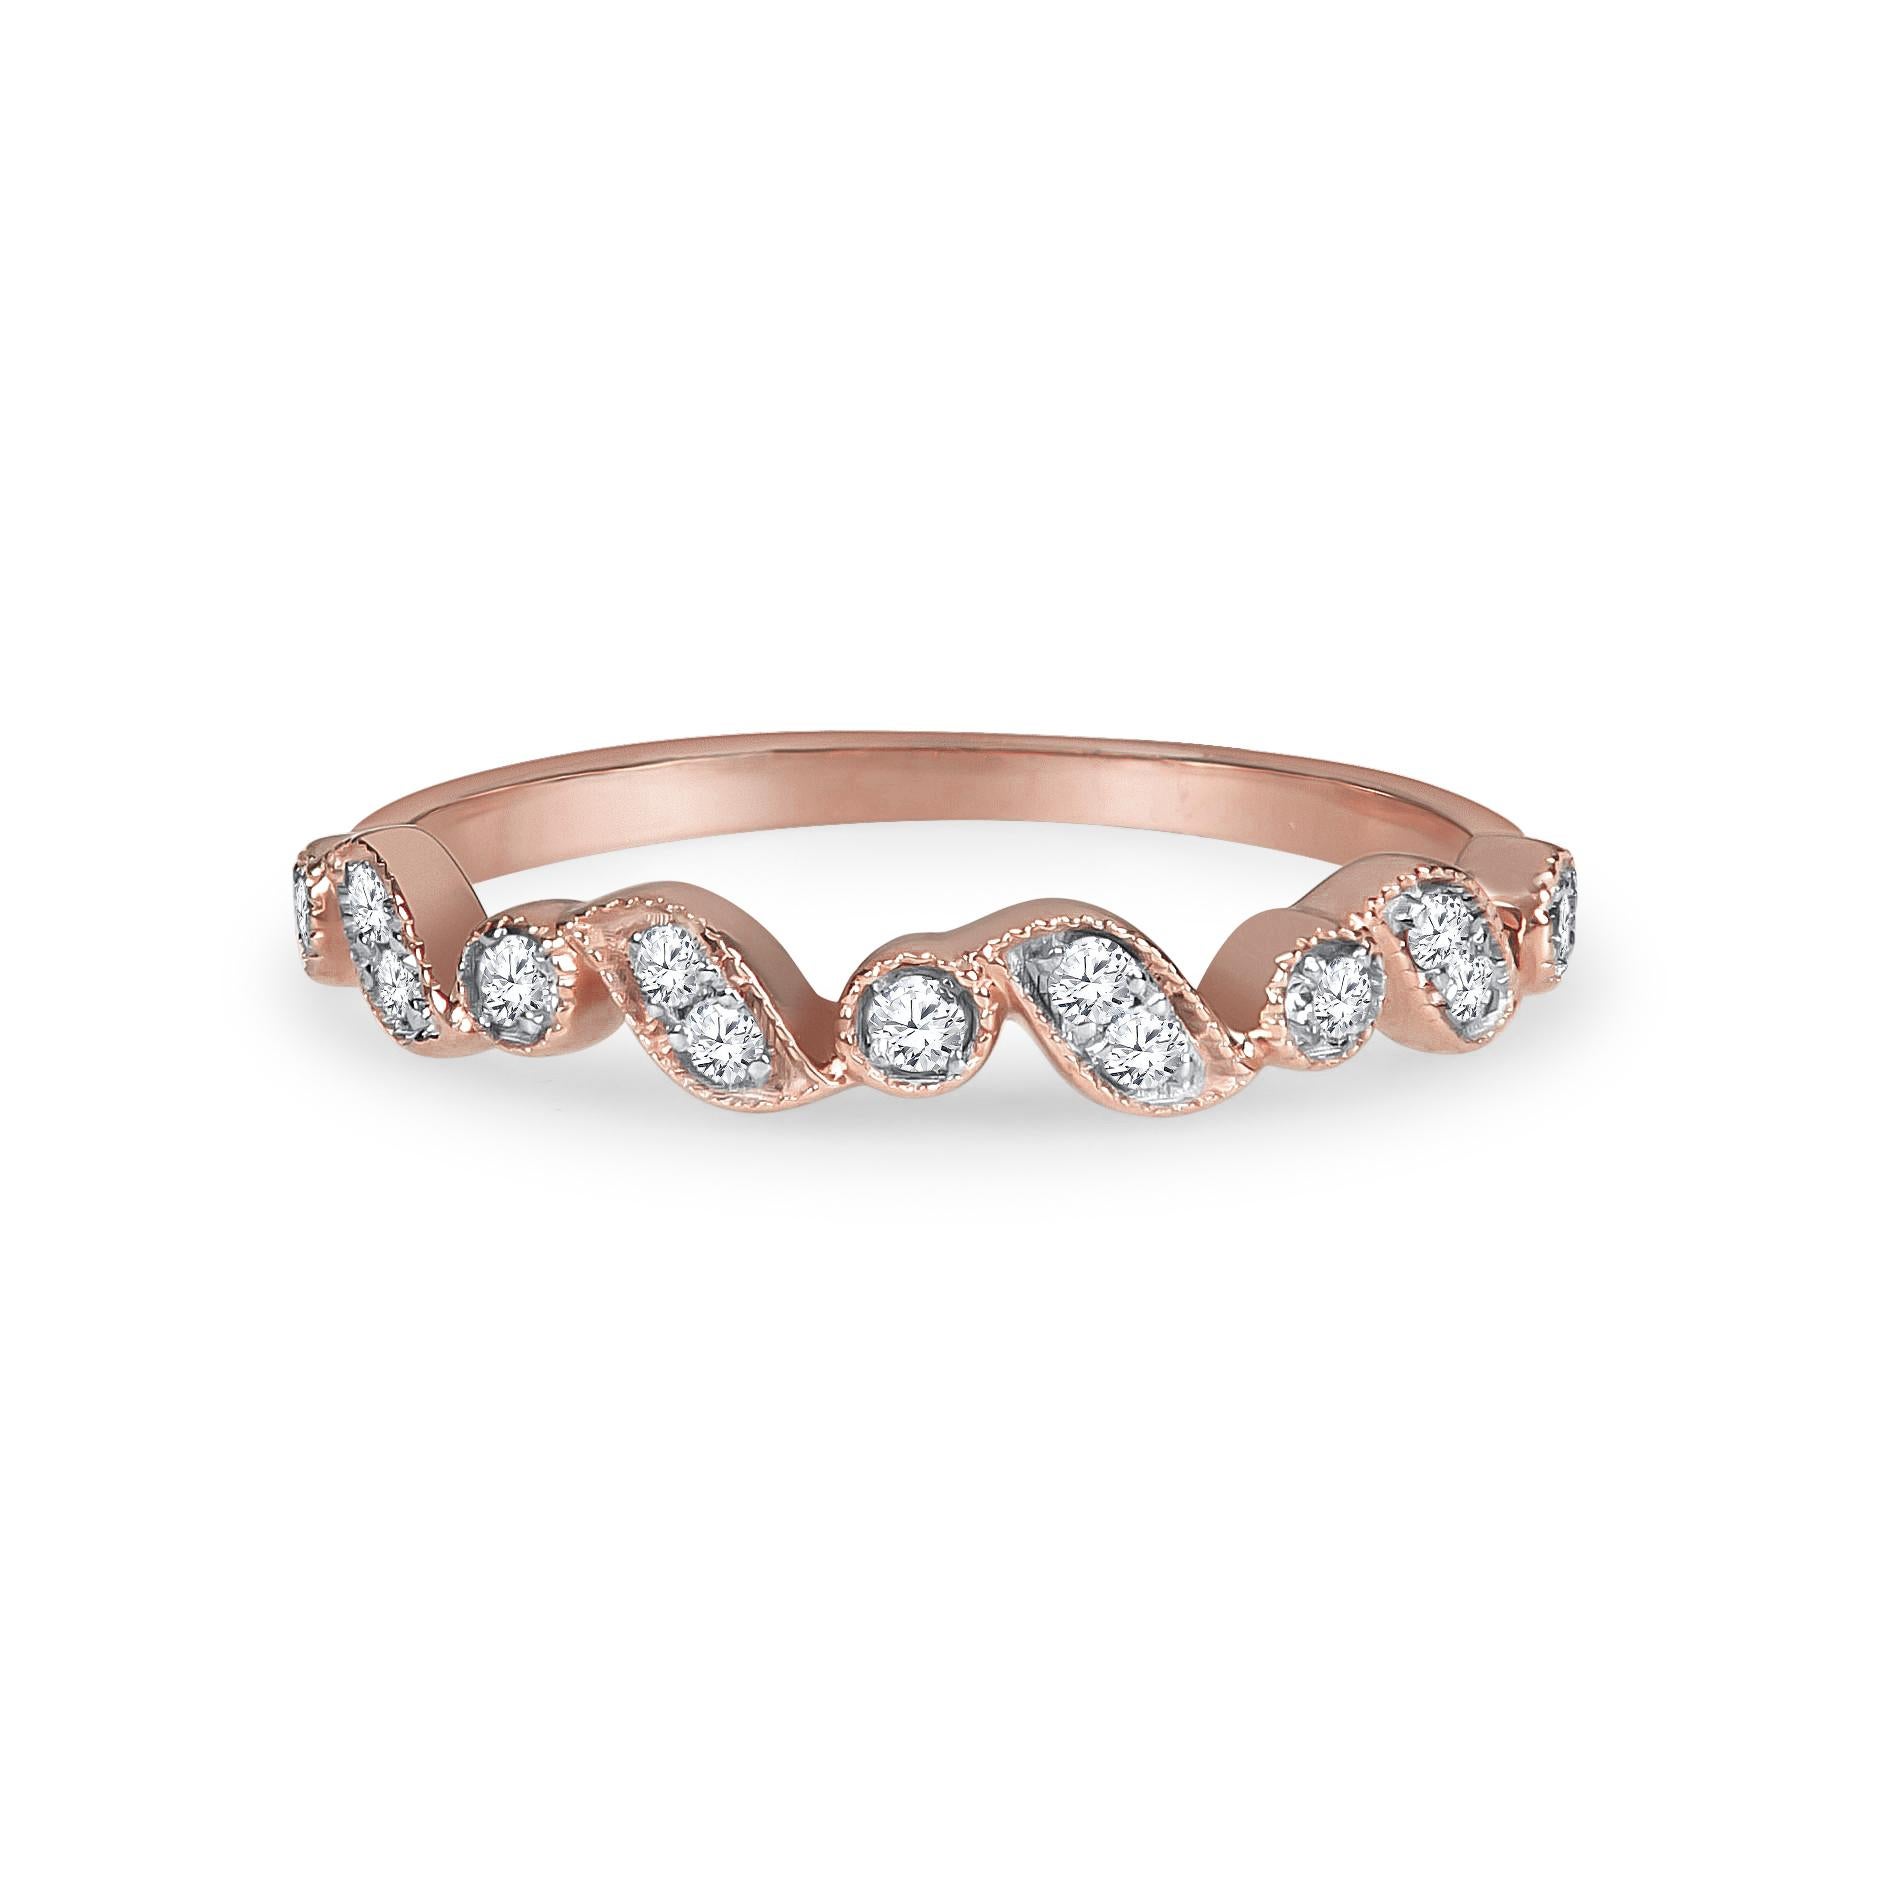 •  Sparkling genuine diamonds create this spectacular diamond ring. Each diamond glimmers with delight from the striking and unique prong setting. You can even get multiple colors and stack them together to create a statement ring! 
•  ✦ GENUINE,